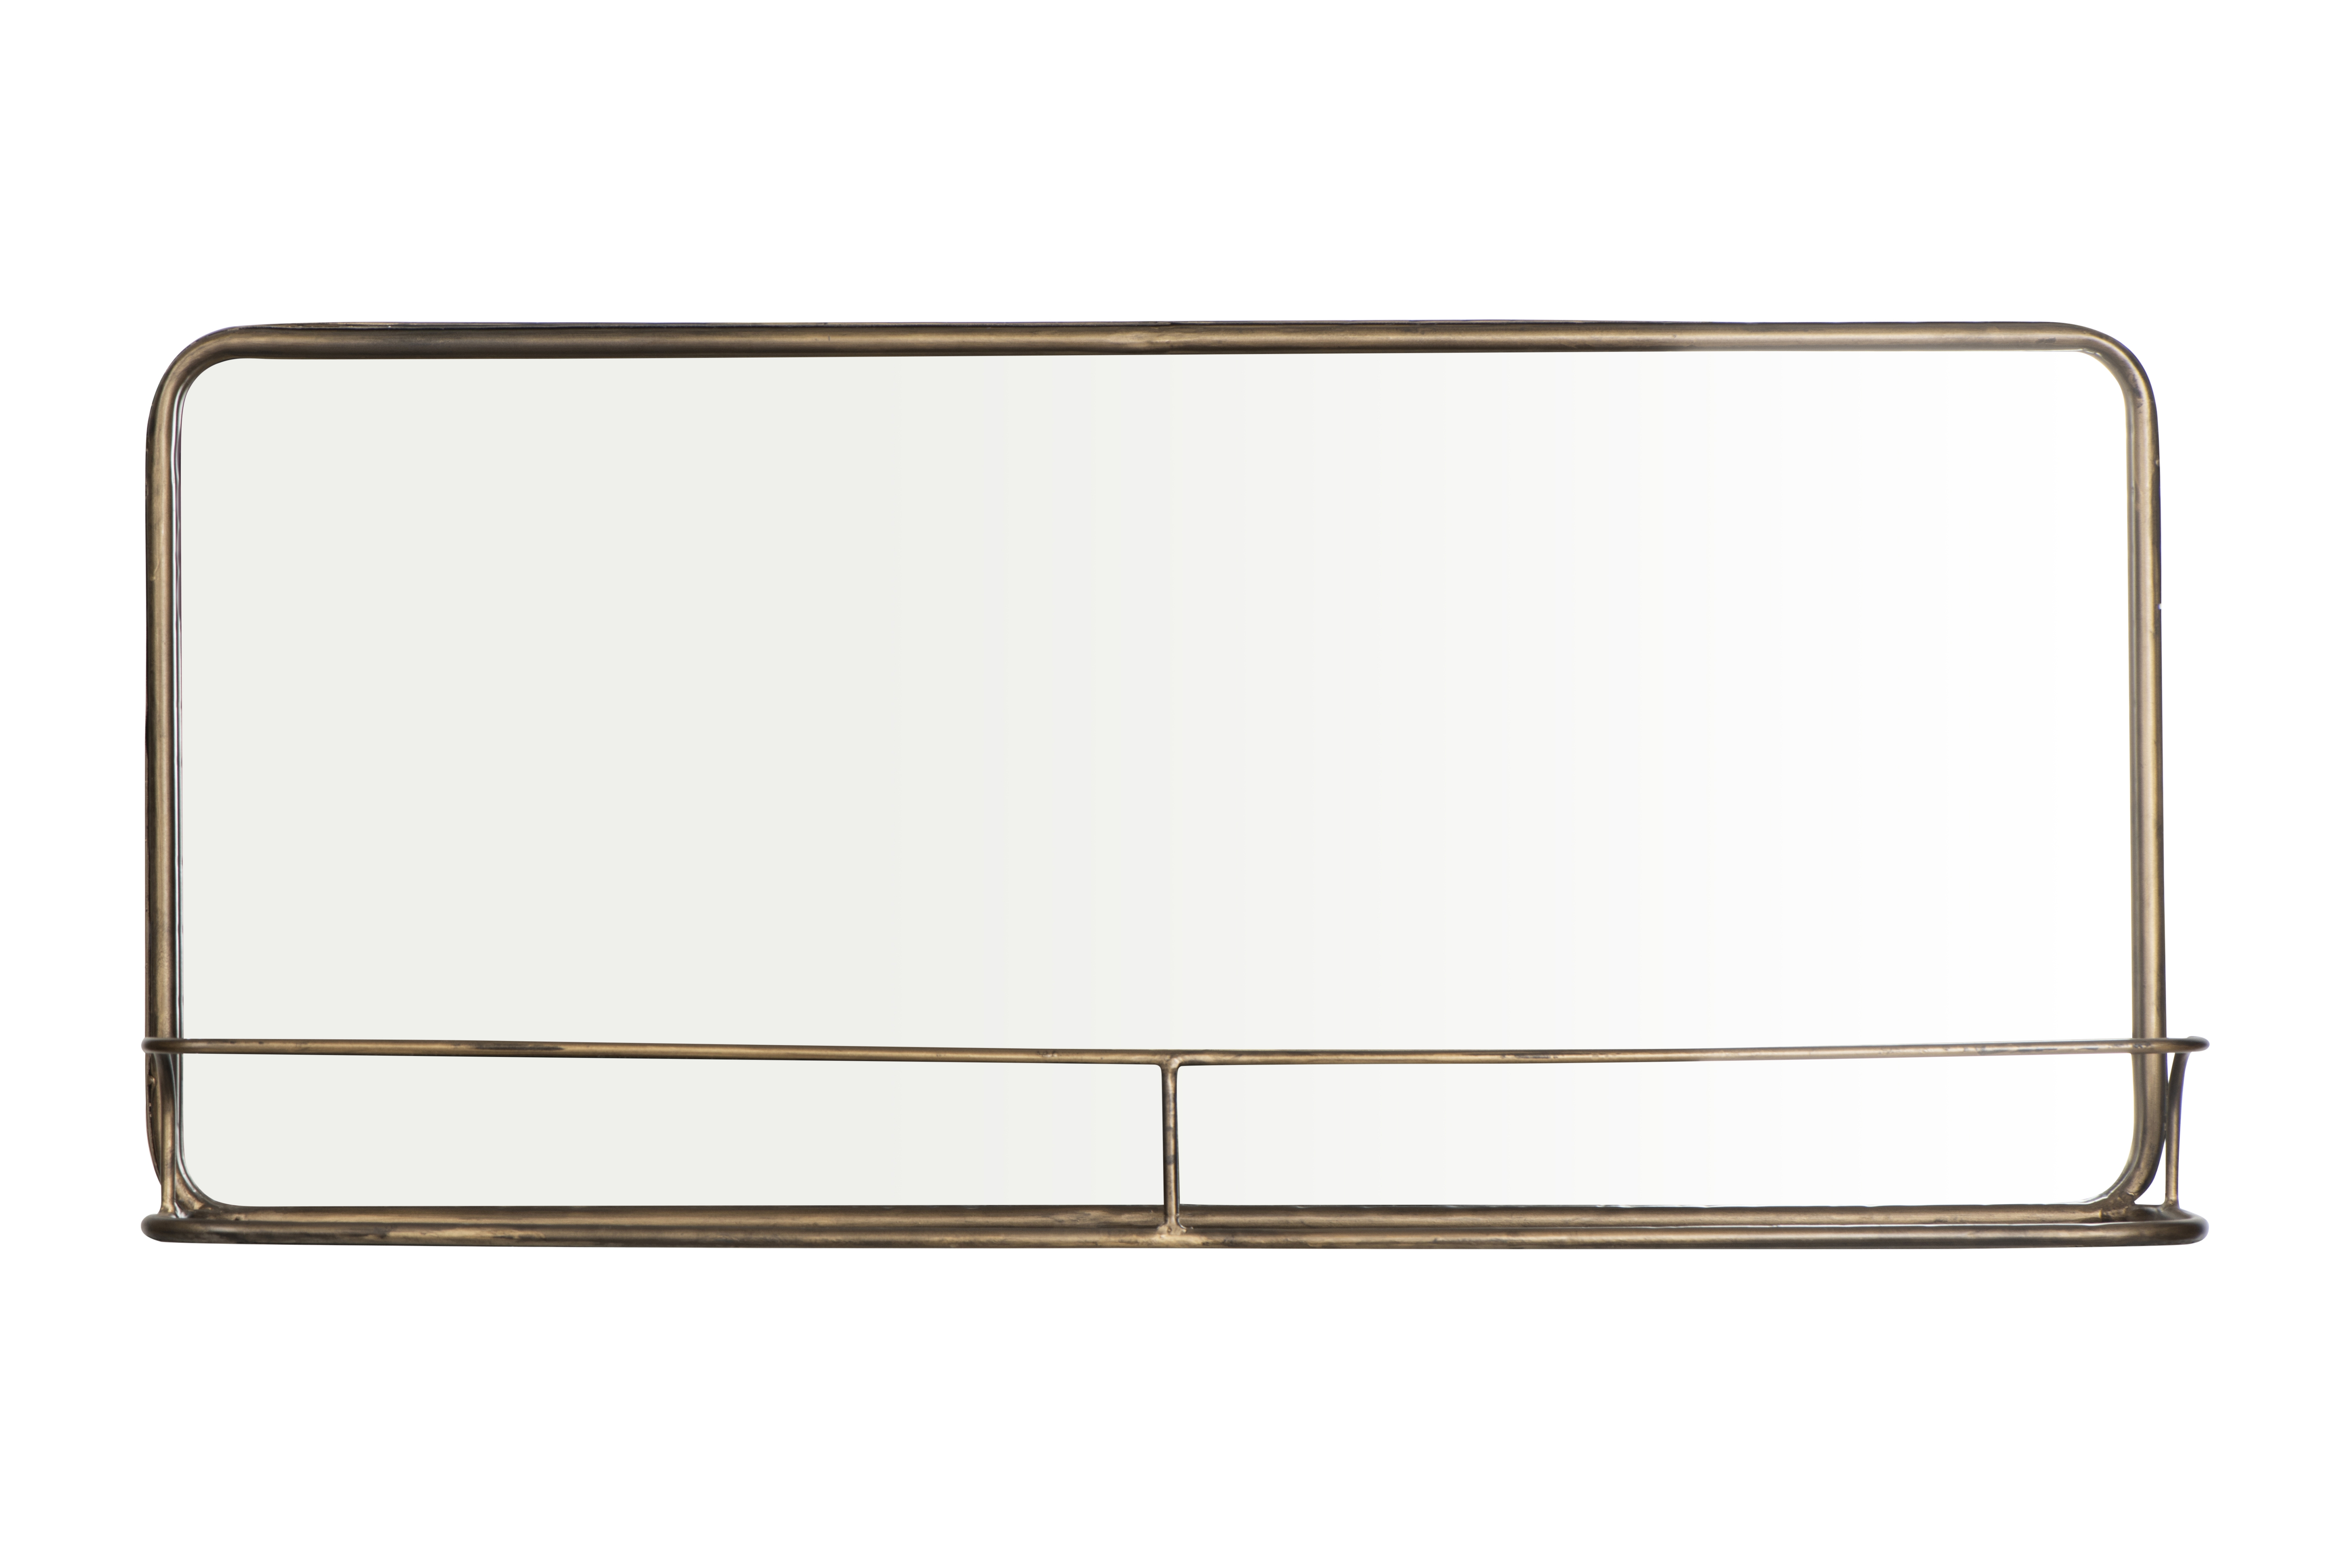 Brass Metal Framed Mirror with Shelf - Nomad Home